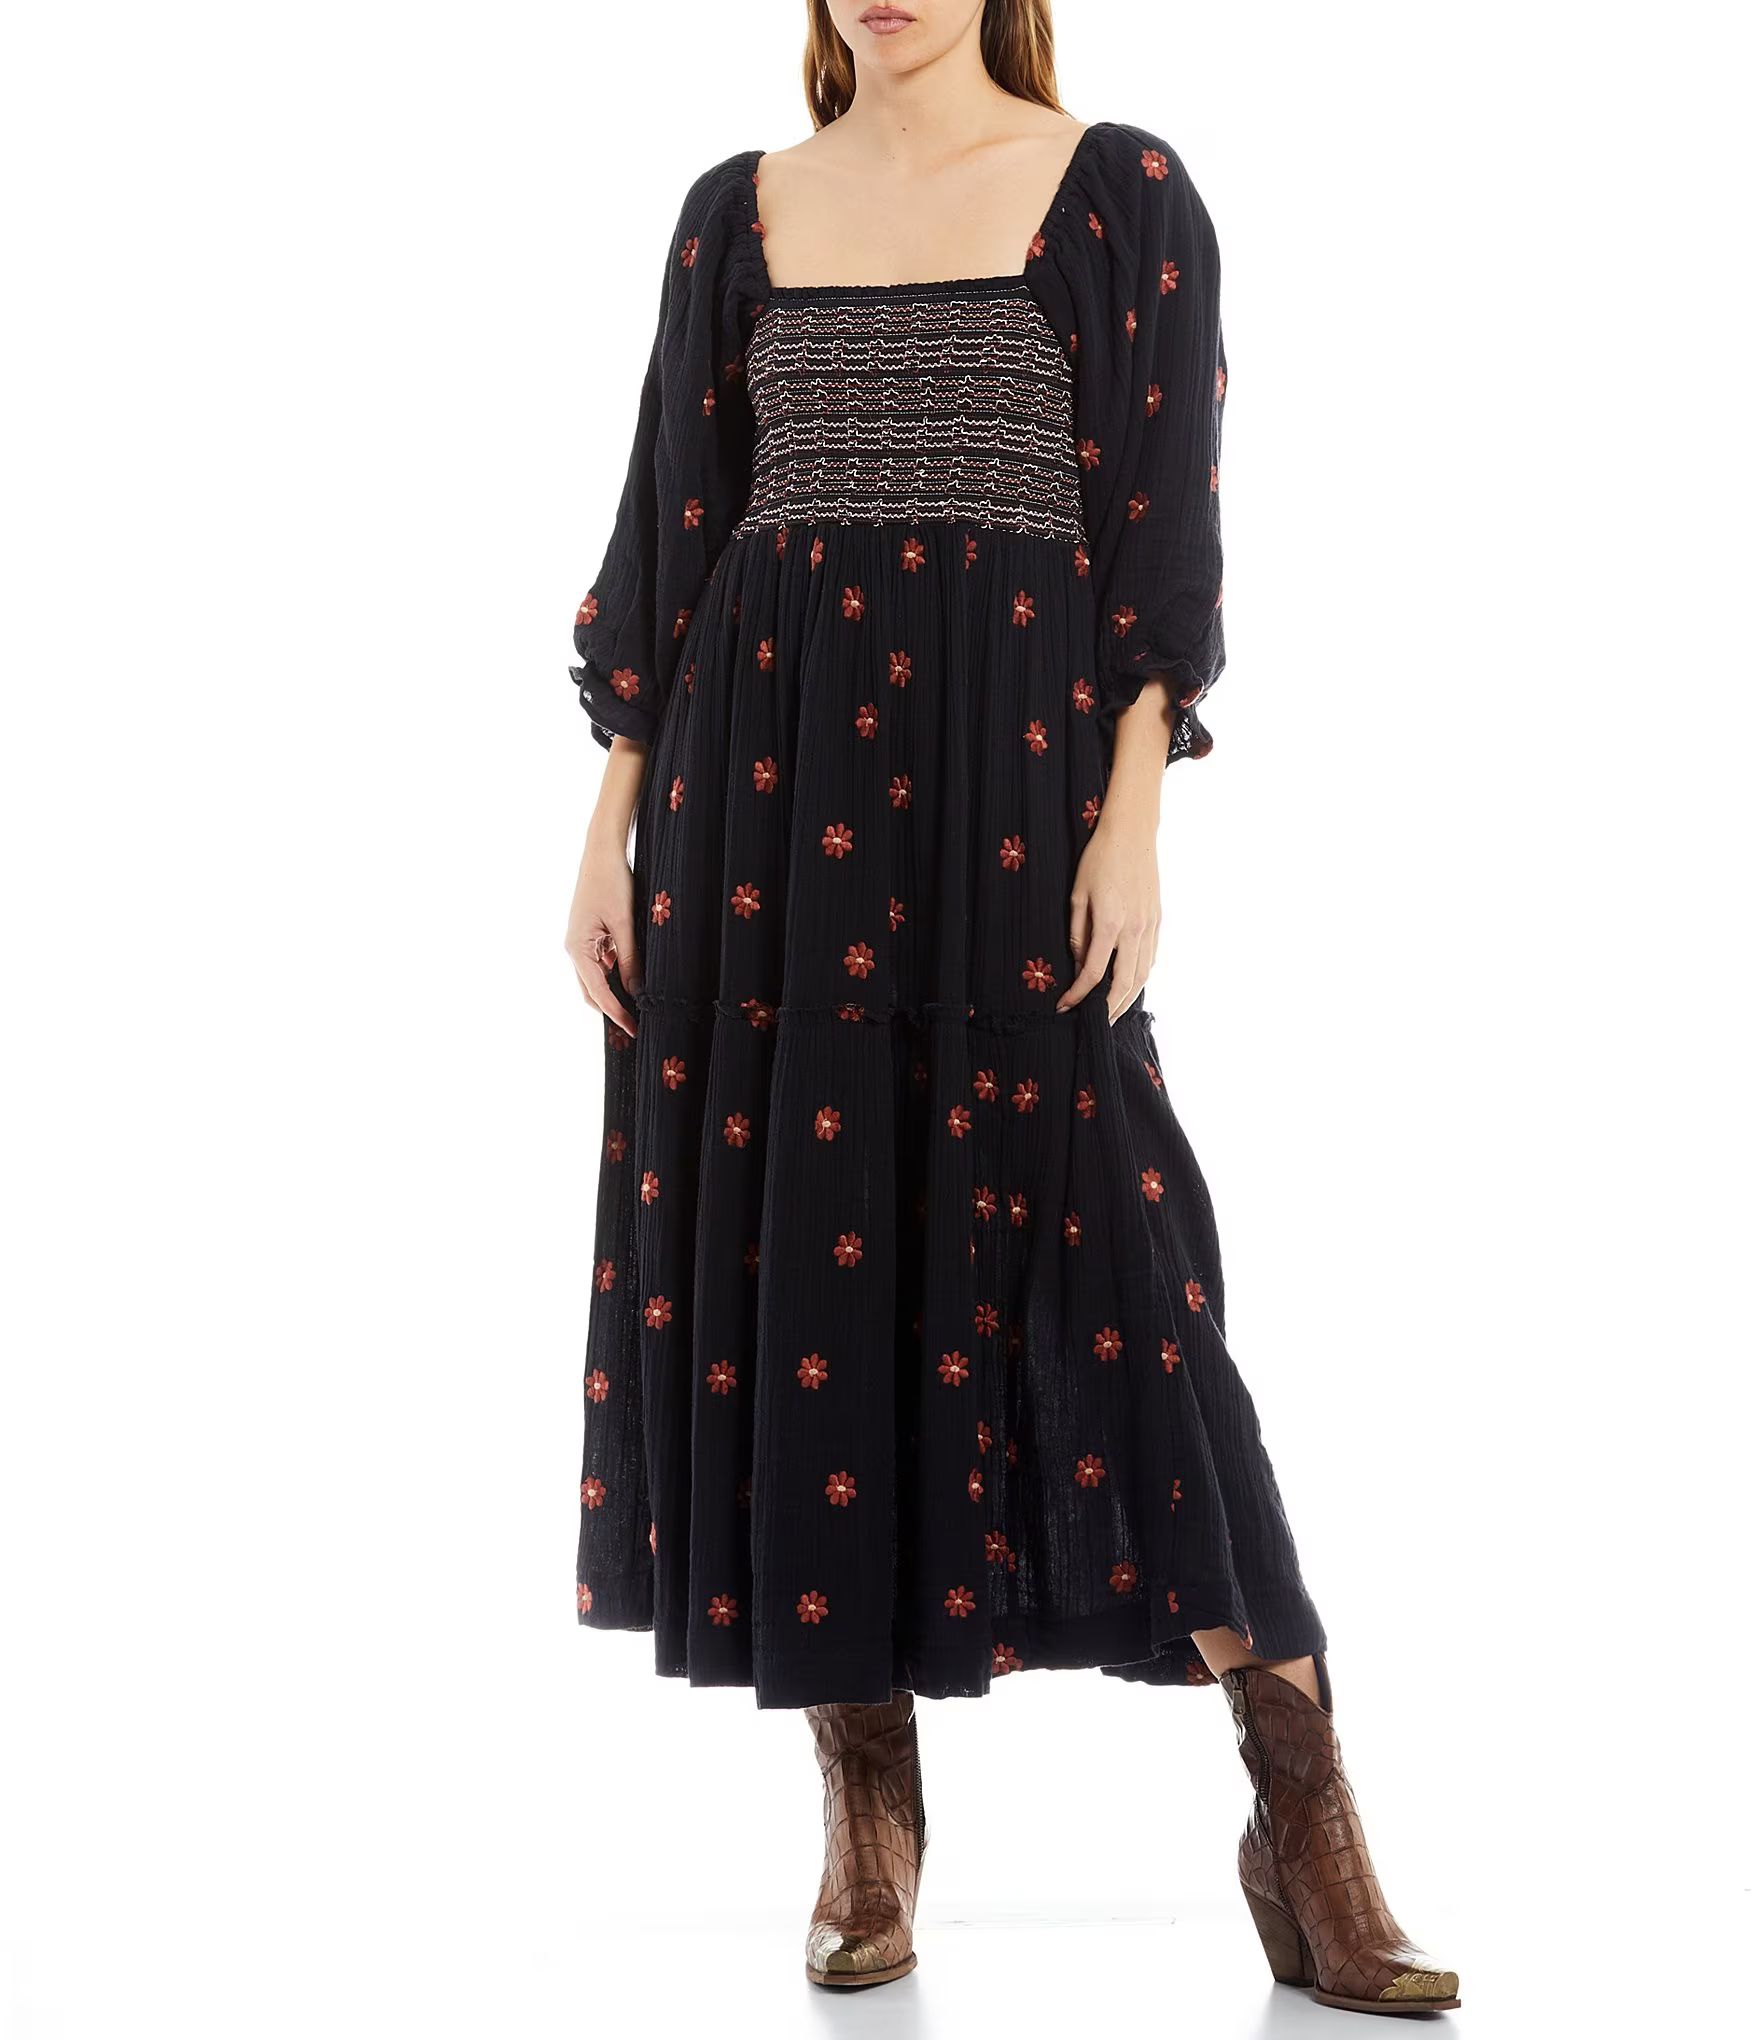 Free PeopleDahlia Floral Print Embroidery Square Neck Smocked Top 3/4 Balloon Sleeve A-Line Dress | Dillard's